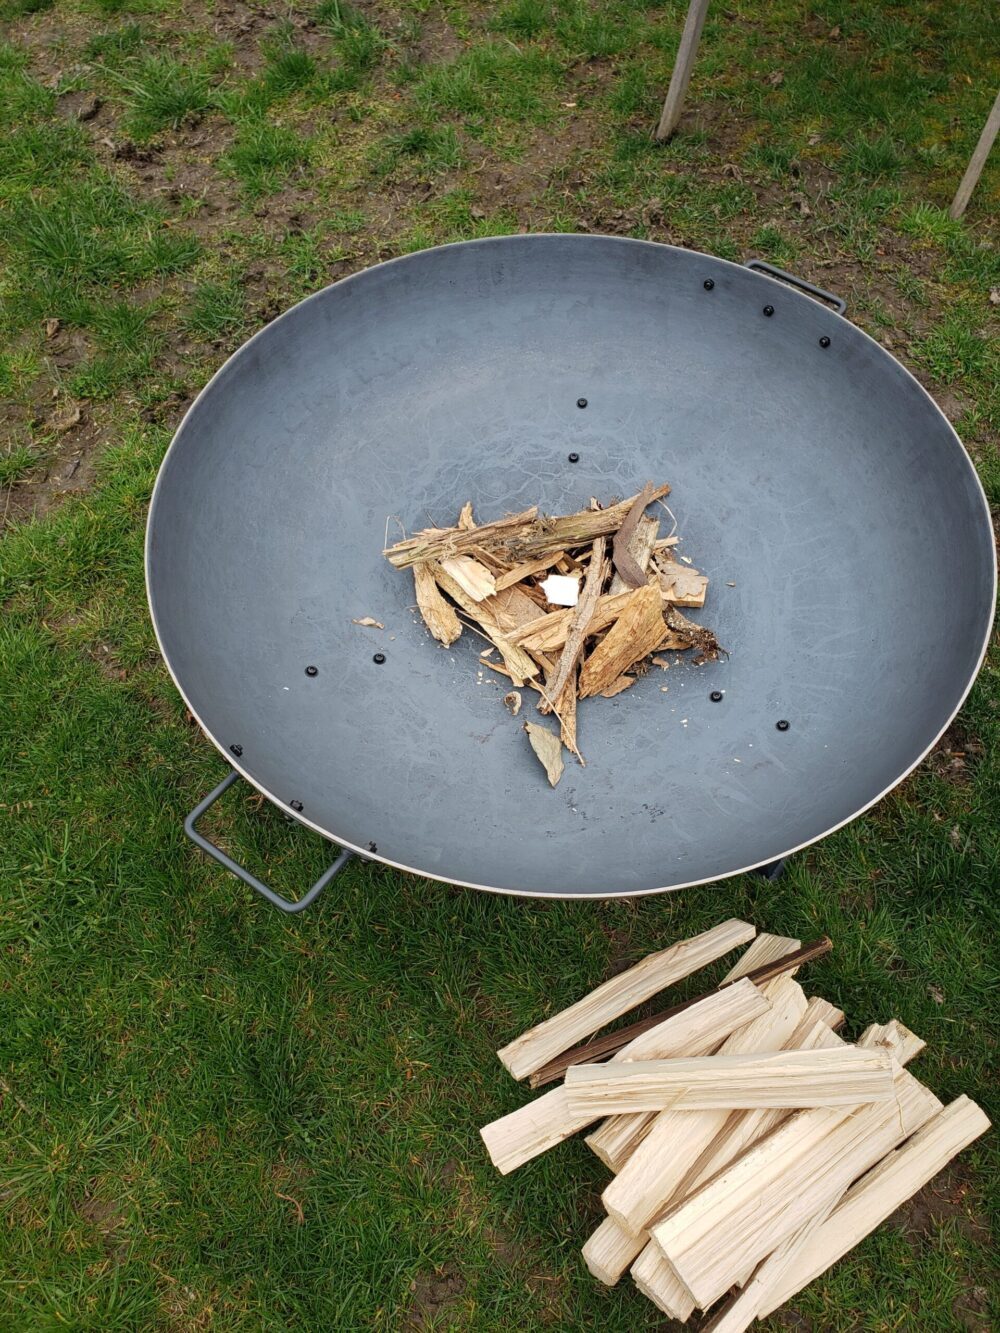 How To Start A Fire In A Fire Pit